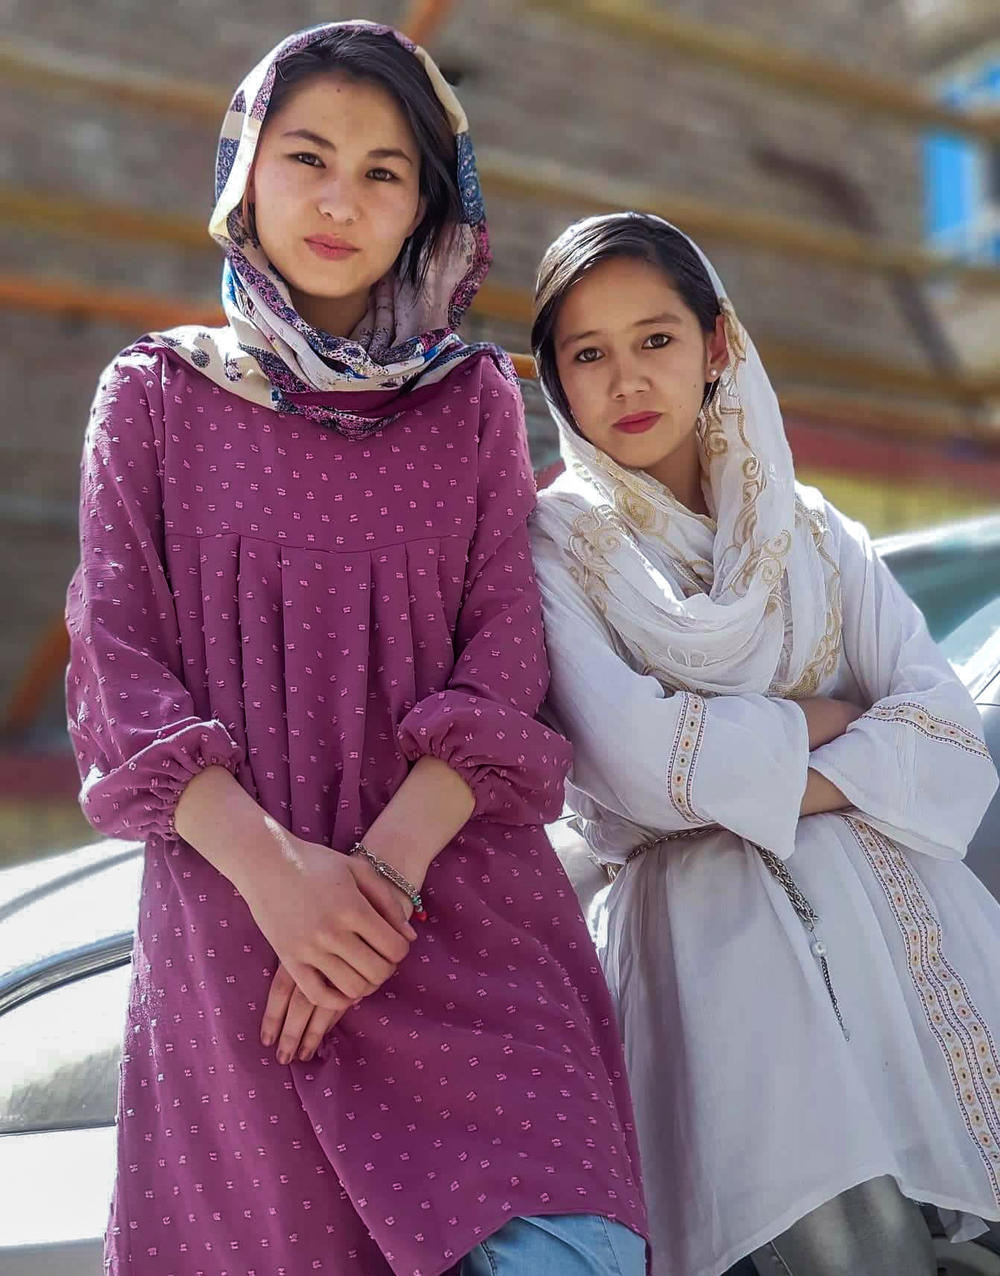 Marzia Mohammadi, left, and Hajar Mohammadi were best friends and cousins who died in a suicide bombing at a learning center in Kabul. Marzia's diary captures both the hopes and fears of young Afghan women, particularly Hazaras, under Taliban rule.